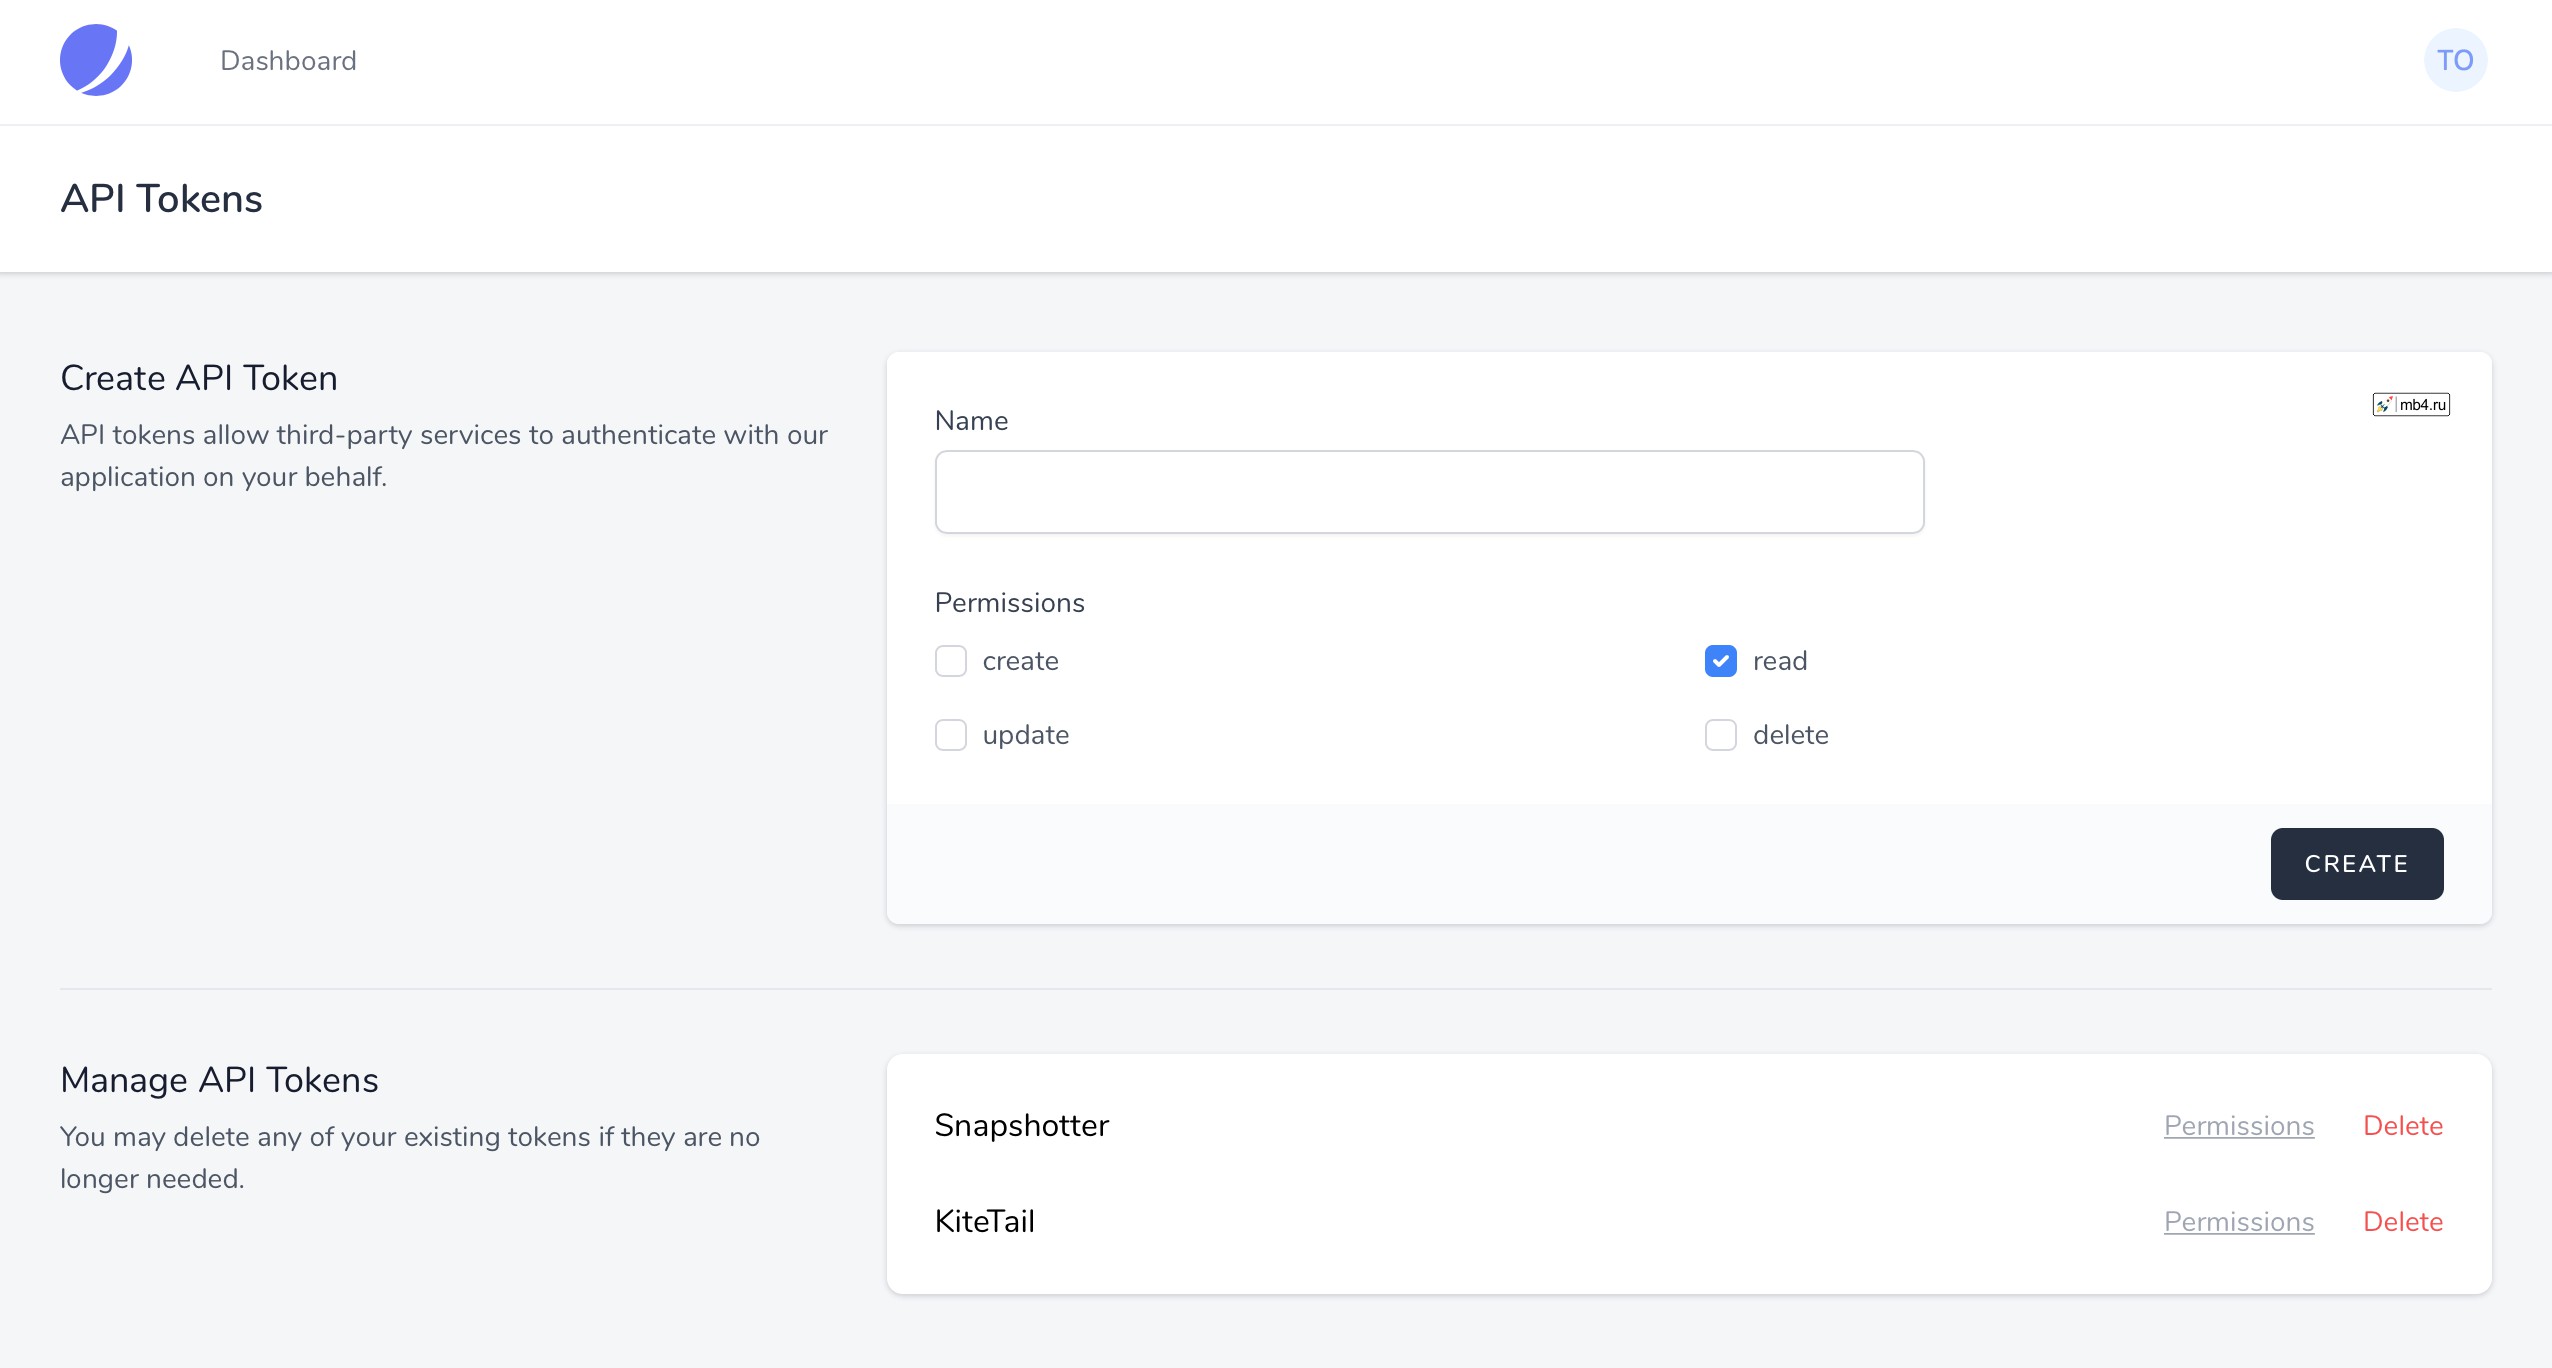 Laravel Sanctum provides a featherweight authentication system for SPAs (single page applications), mobile applications, and simple, token based APIs.